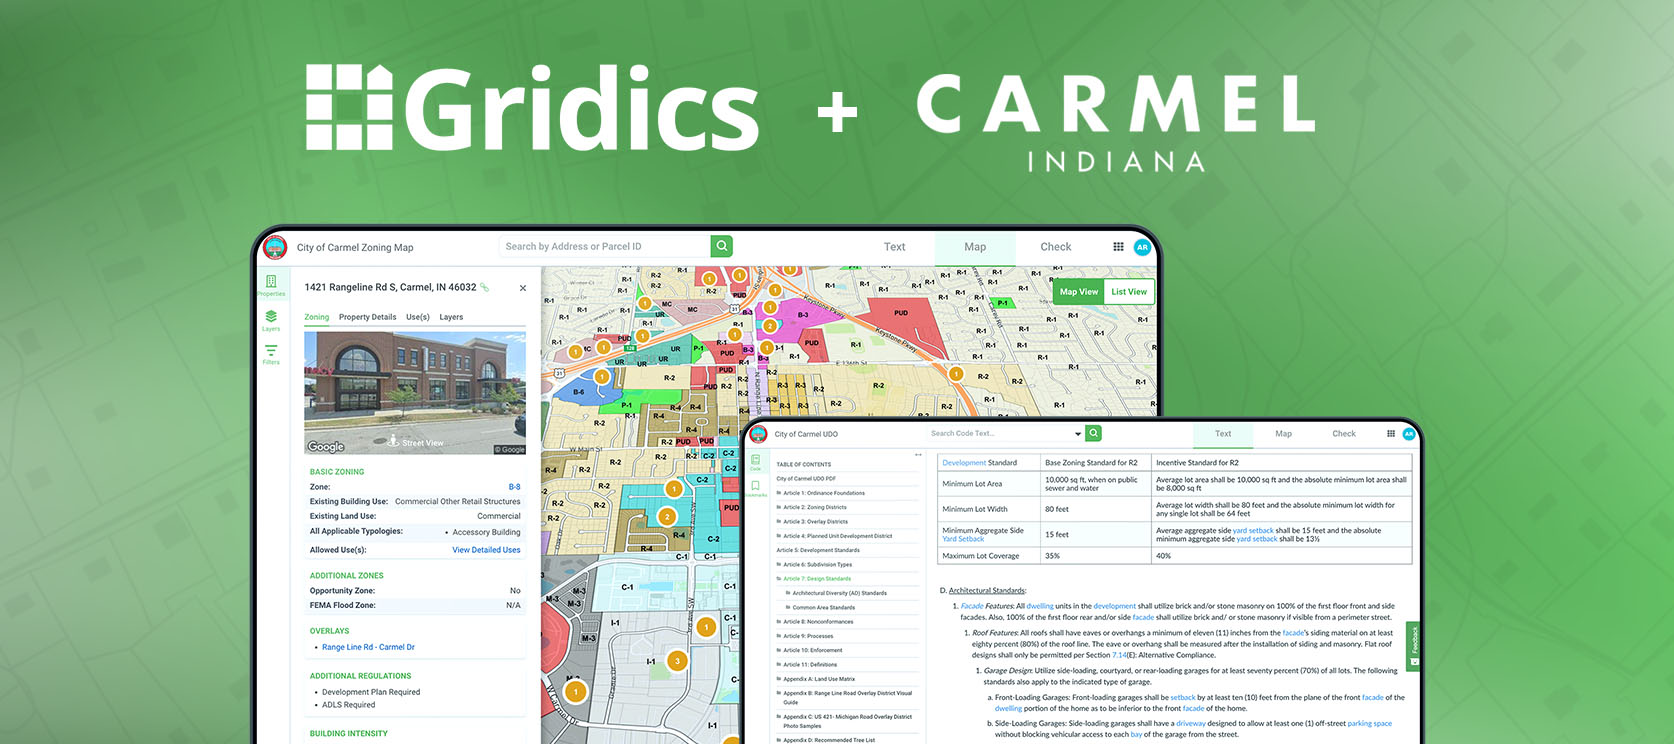 Fourth Largest City in Indiana Adopts the Gridics Municipal Zoning Platform